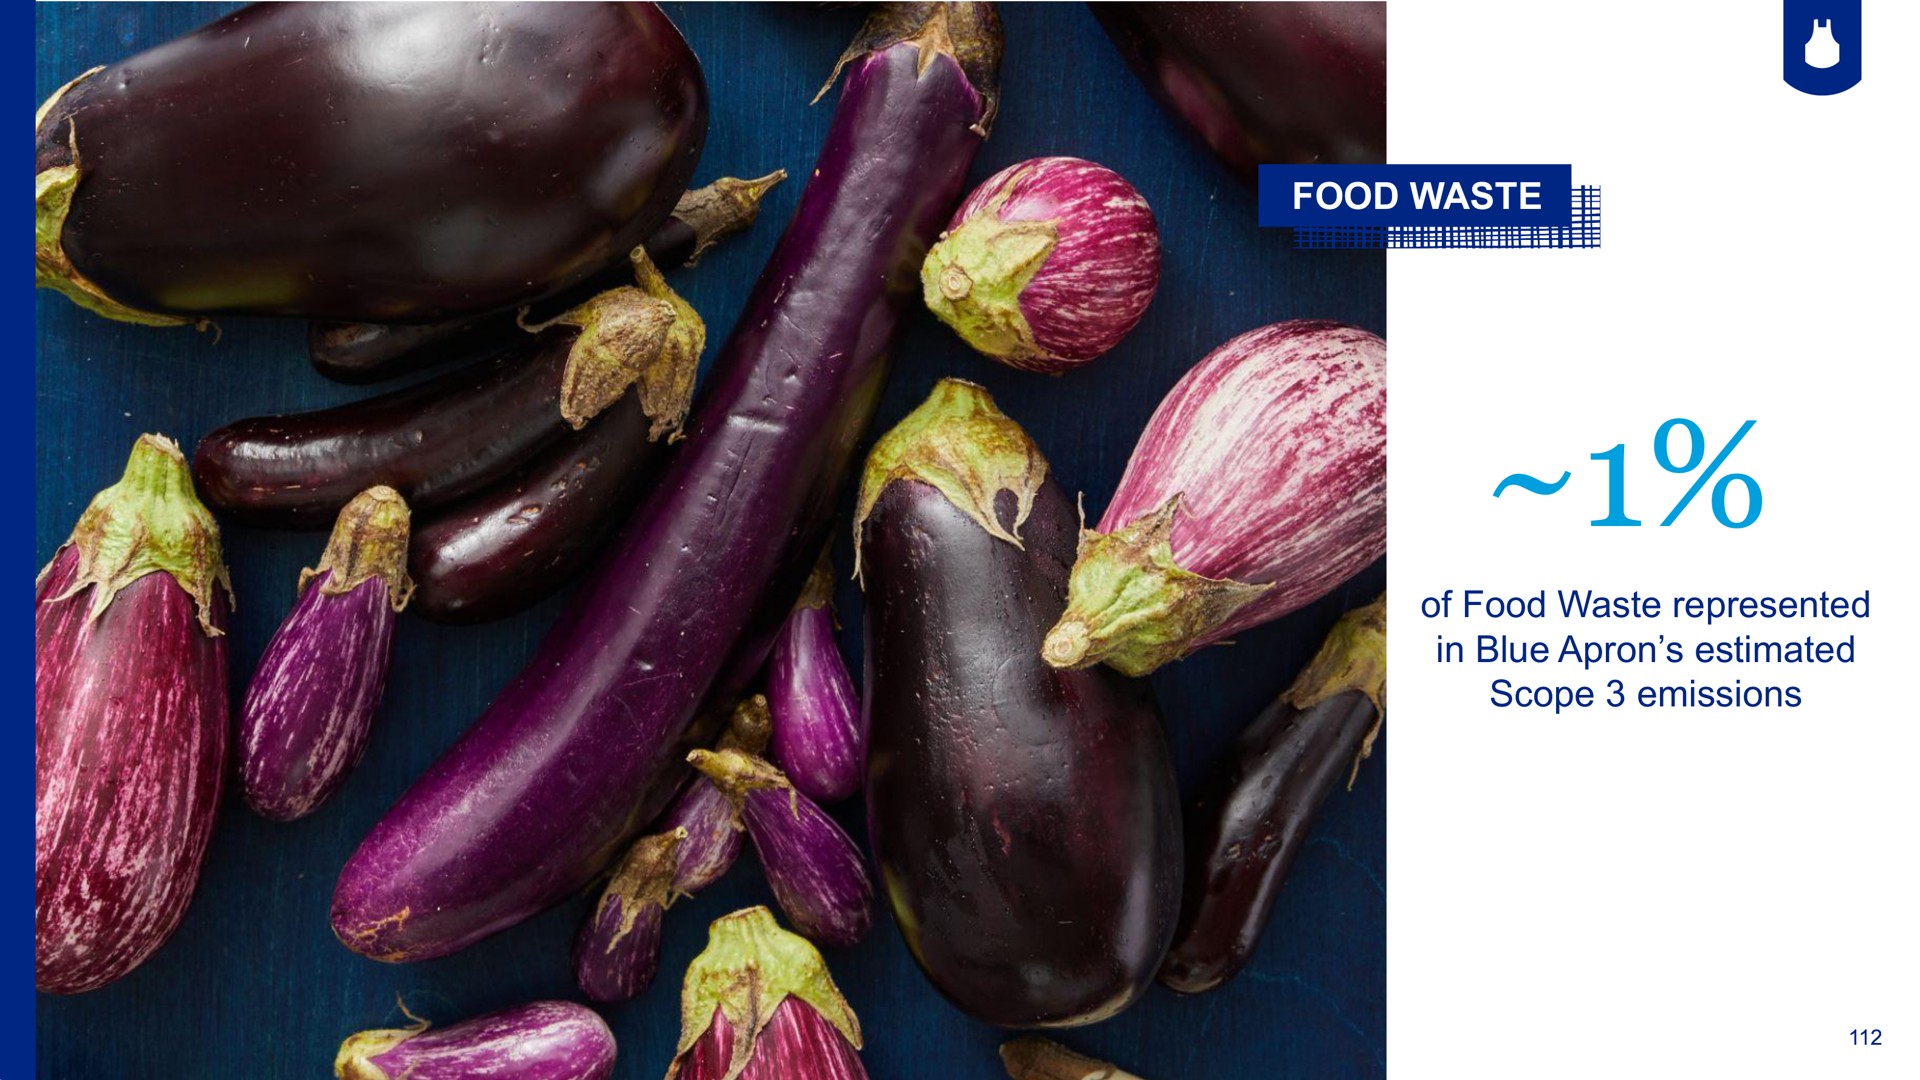 food waste of food waste represented in blue apron estimated scope emissions | Blue Apron